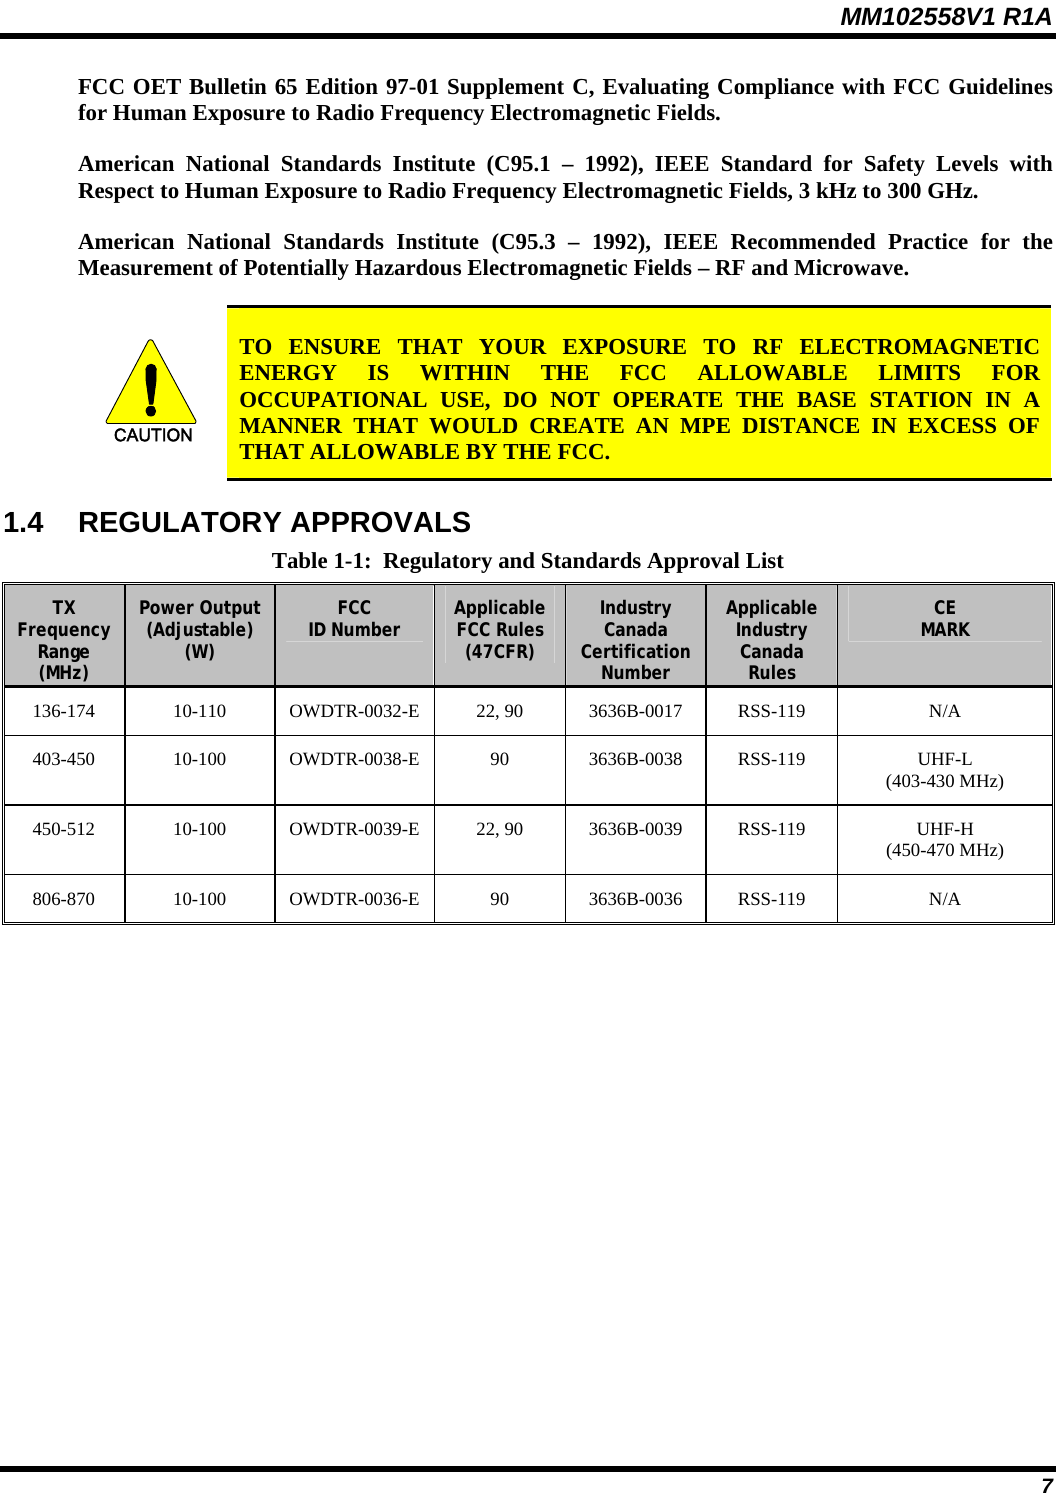 MM102558V1 R1A FCC OET Bulletin 65 Edition 97-01 Supplement C, Evaluating Compliance with FCC Guidelines for Human Exposure to Radio Frequency Electromagnetic Fields. American National Standards Institute (C95.1 – 1992), IEEE Standard for Safety Levels with Respect to Human Exposure to Radio Frequency Electromagnetic Fields, 3 kHz to 300 GHz. American National Standards Institute (C95.3 – 1992), IEEE Recommended Practice for the Measurement of Potentially Hazardous Electromagnetic Fields – RF and Microwave.  CAUTION  TO ENSURE THAT YOUR EXPOSURE TO RF ELECTROMAGNETIC ENERGY IS WITHIN THE FCC ALLOWABLE LIMITS FOR OCCUPATIONAL USE, DO NOT OPERATE THE BASE STATION IN A MANNER THAT WOULD CREATE AN MPE DISTANCE IN EXCESS OF THAT ALLOWABLE BY THE FCC. 1.4 REGULATORY APPROVALS Table 1-1:  Regulatory and Standards Approval List TX Frequency Range (MHz) Power Output (Adjustable) (W) FCC ID Number Applicable FCC Rules (47CFR) Industry Canada Certification Number Applicable Industry Canada Rules CE MARK 136-174 10-110 OWDTR-0032-E 22, 90 3636B-0017 RSS-119  N/A 403-450 10-100 OWDTR-0038-E 90 3636B-0038 RSS-119  UHF-L (403-430 MHz) 450-512 10-100 OWDTR-0039-E 22, 90 3636B-0039 RSS-119  UHF-H (450-470 MHz) 806-870 10-100 OWDTR-0036-E 90 3636B-0036 RSS-119  N/A                   7 